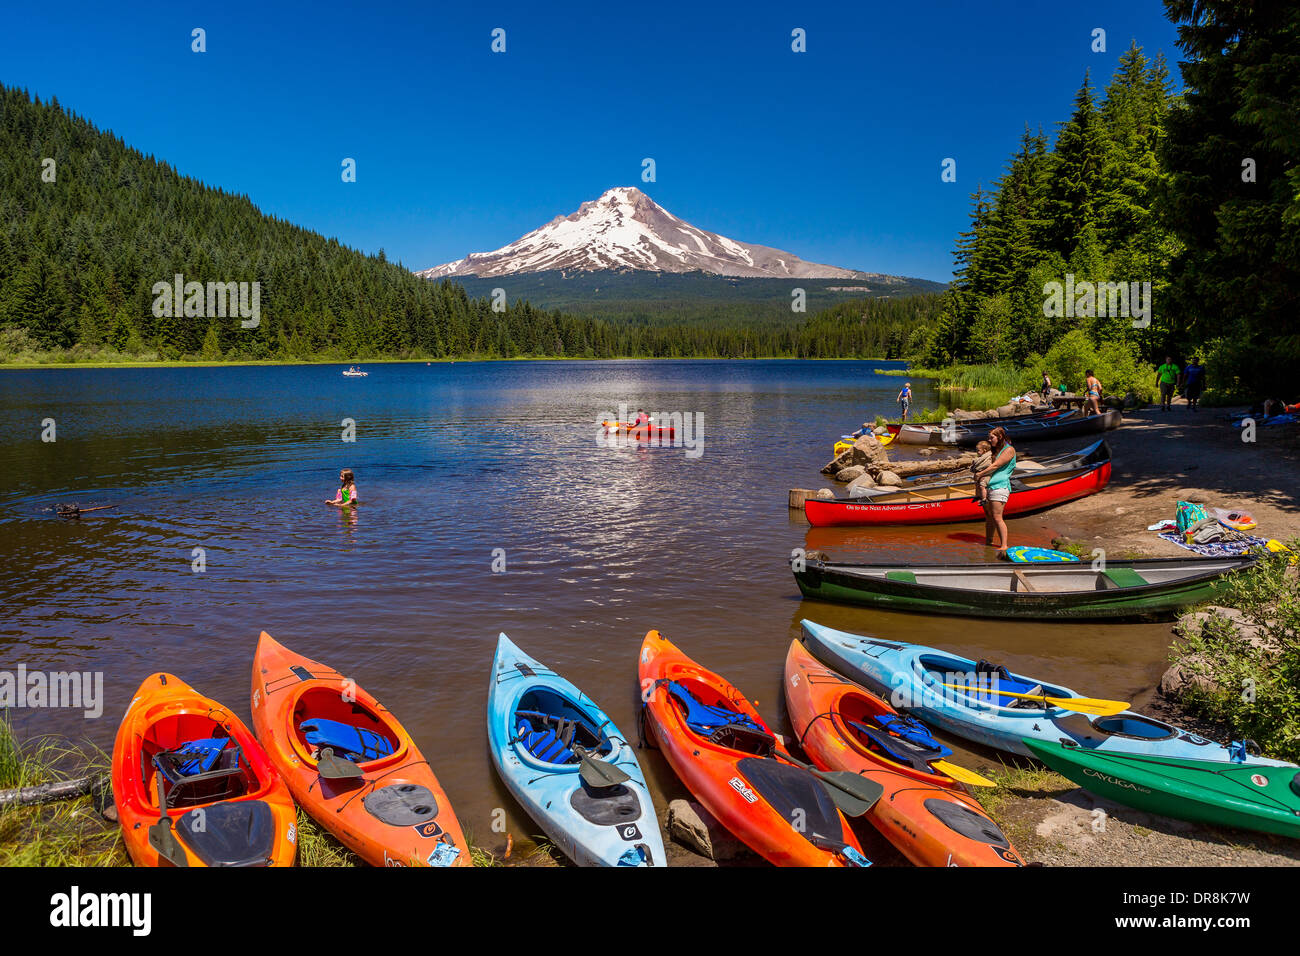 GOVERNMENT CAMP,OREGON, USA - People, canoes and kayaks at Trillium Lake, and Mount Hood. Stock Photo